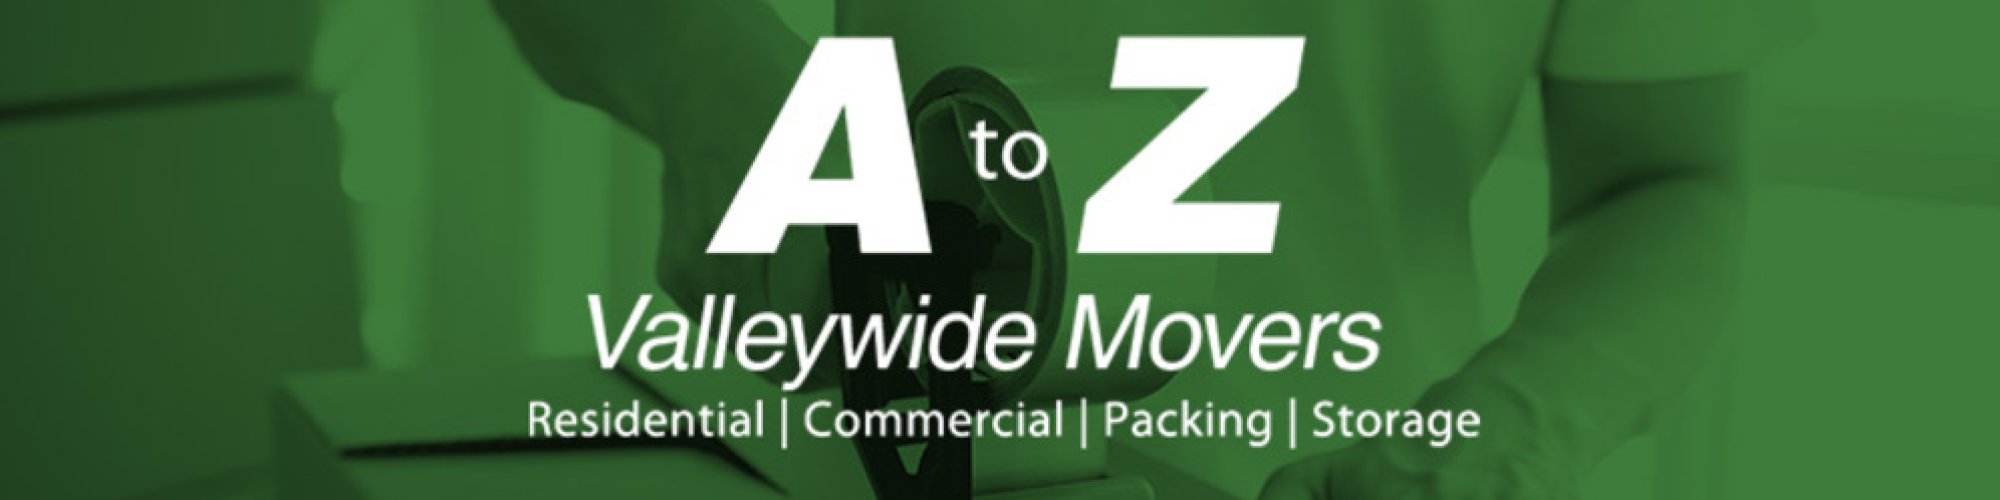 A To Z Valleywide Movers